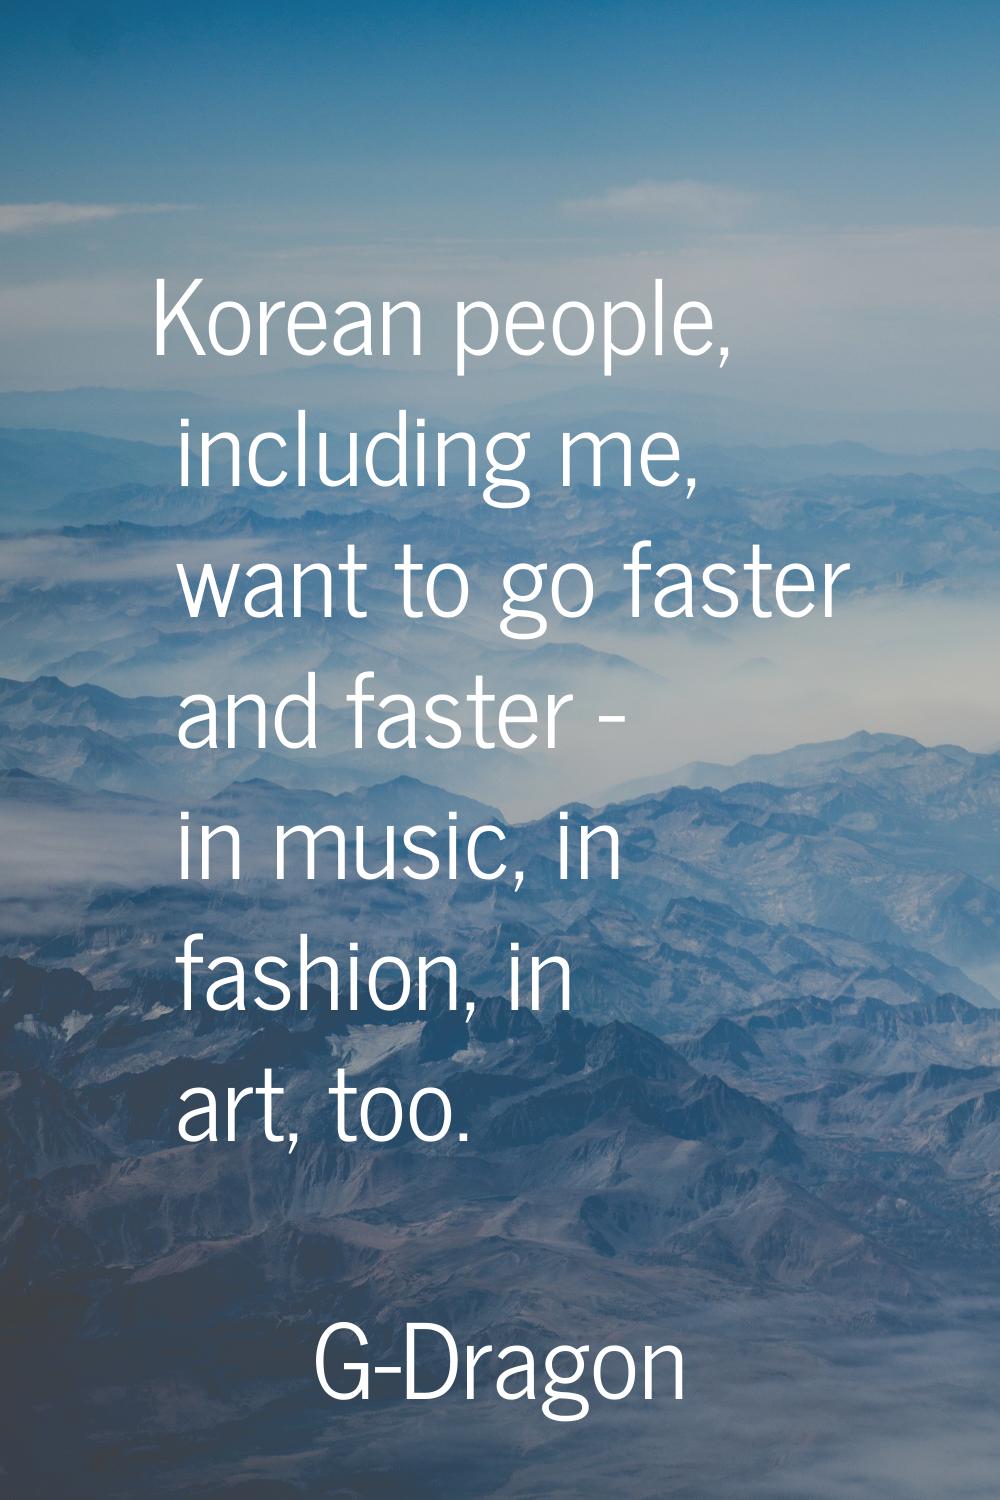 Korean people, including me, want to go faster and faster - in music, in fashion, in art, too.